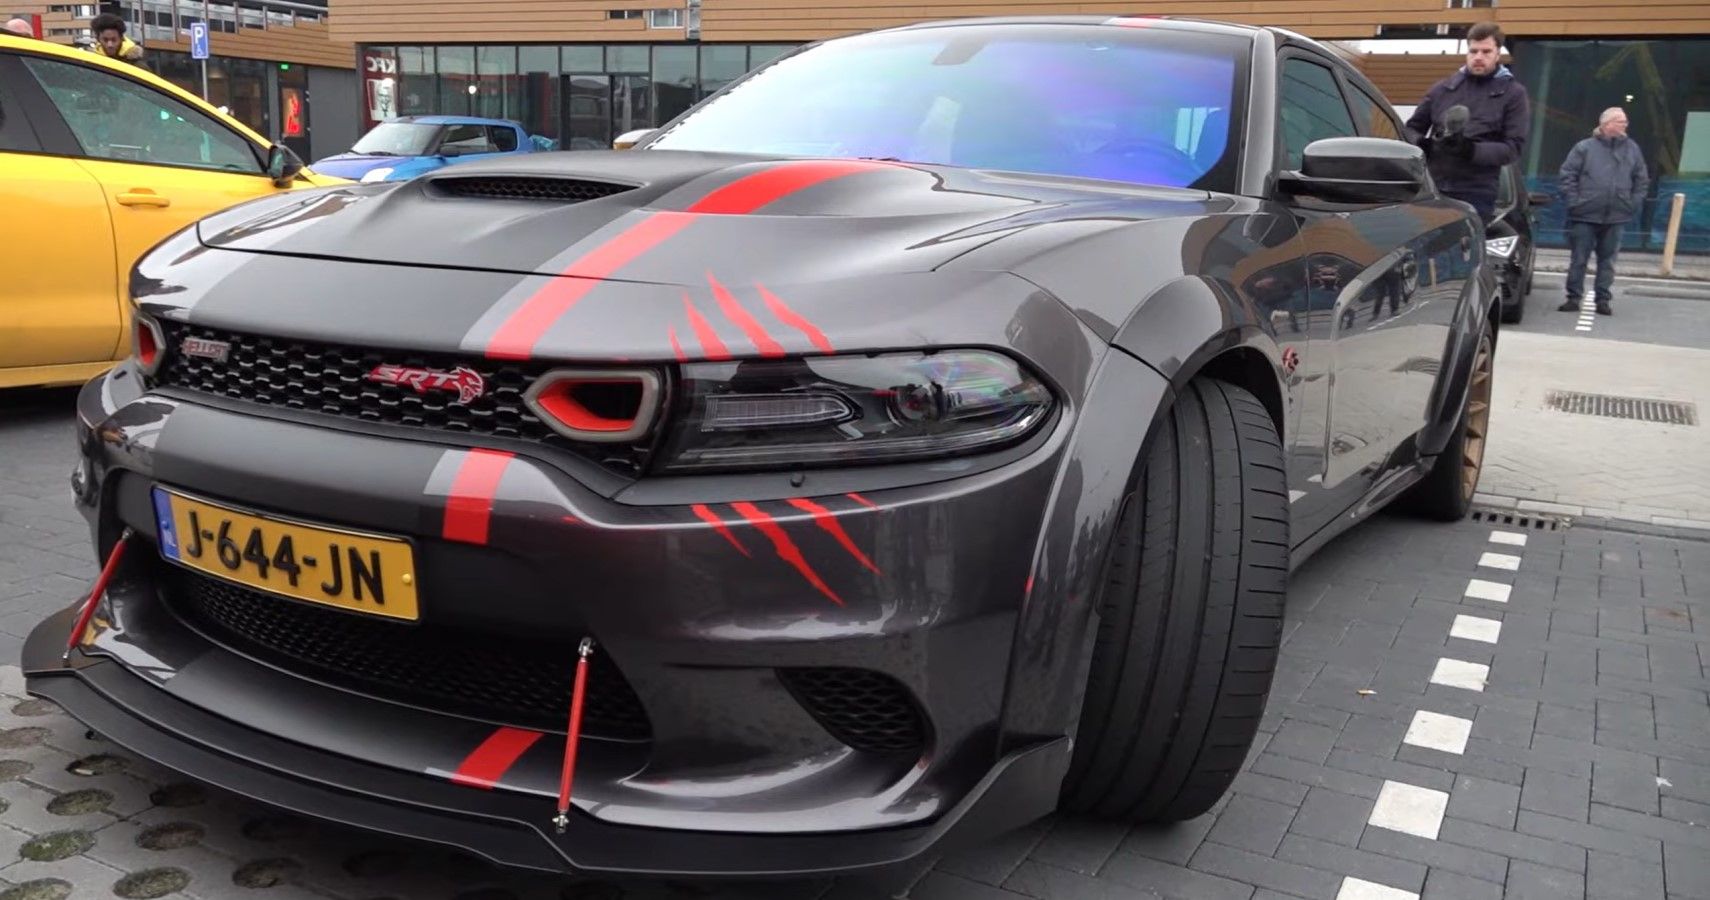 Modified Dodge Charger Hellcat headlight claw mark decal close-up view